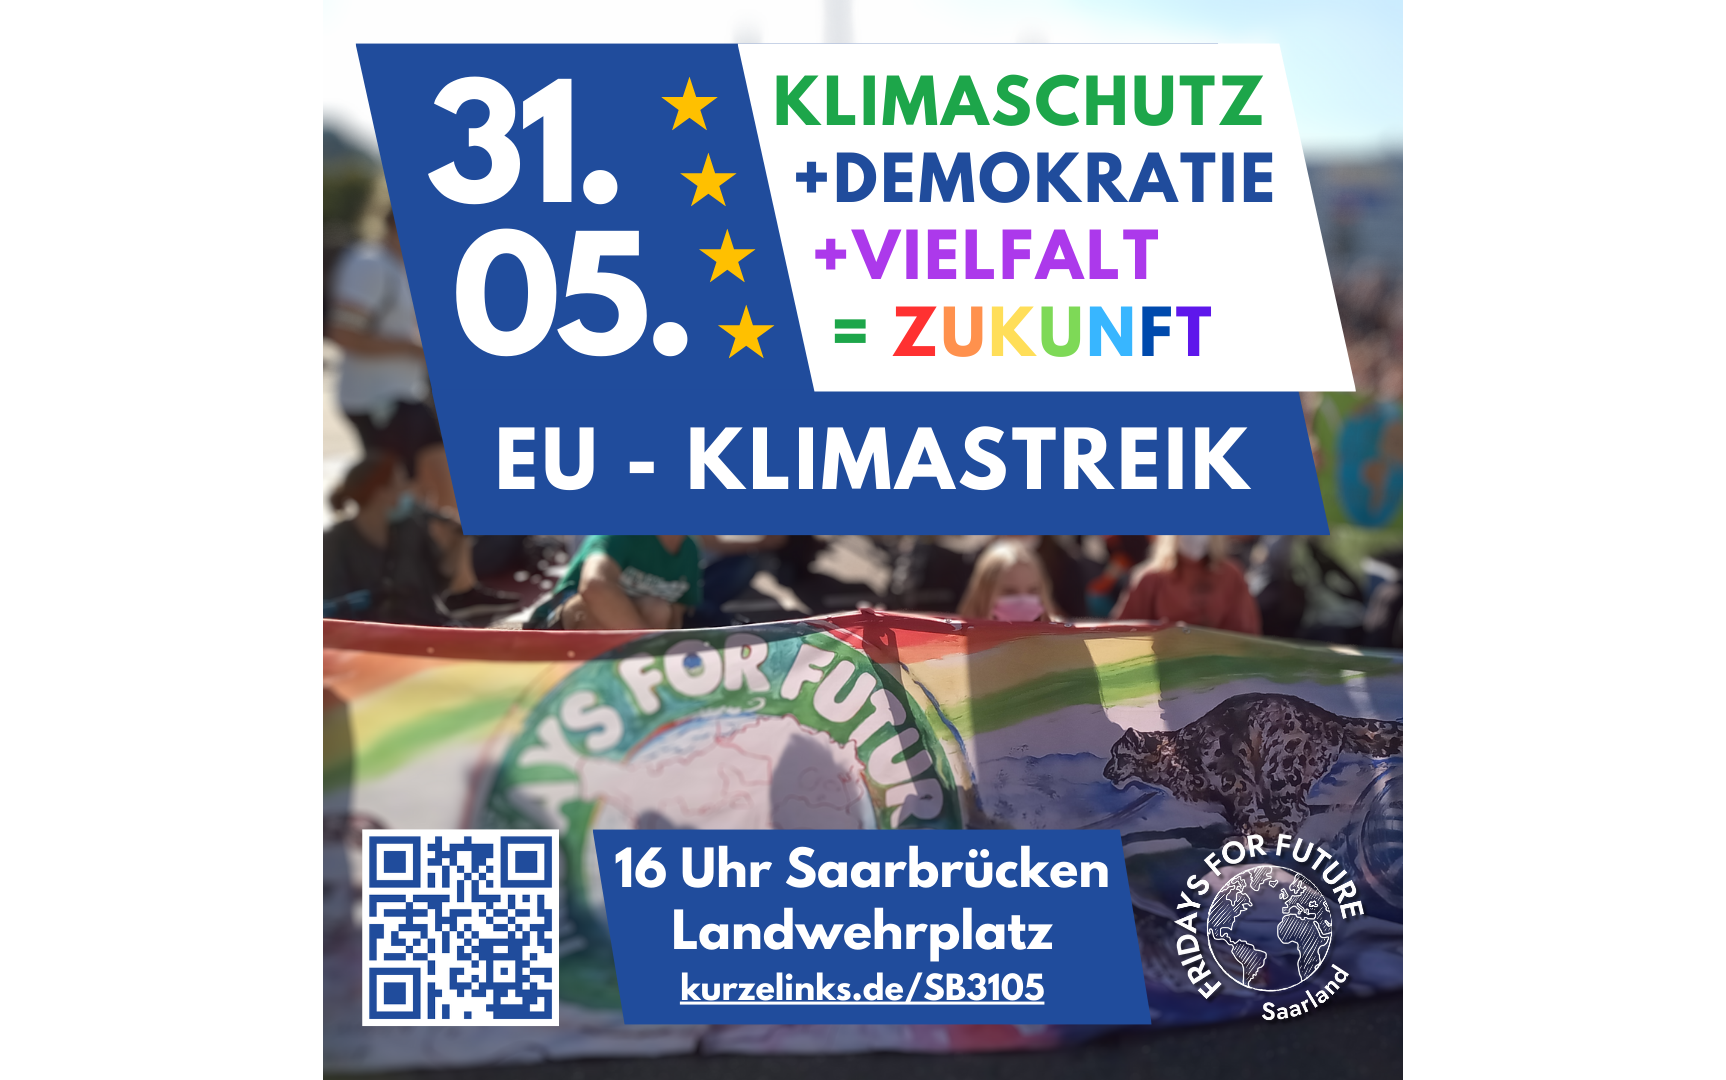 Fridays for Future Saarland, Students for Future Saar, Saarland for Future